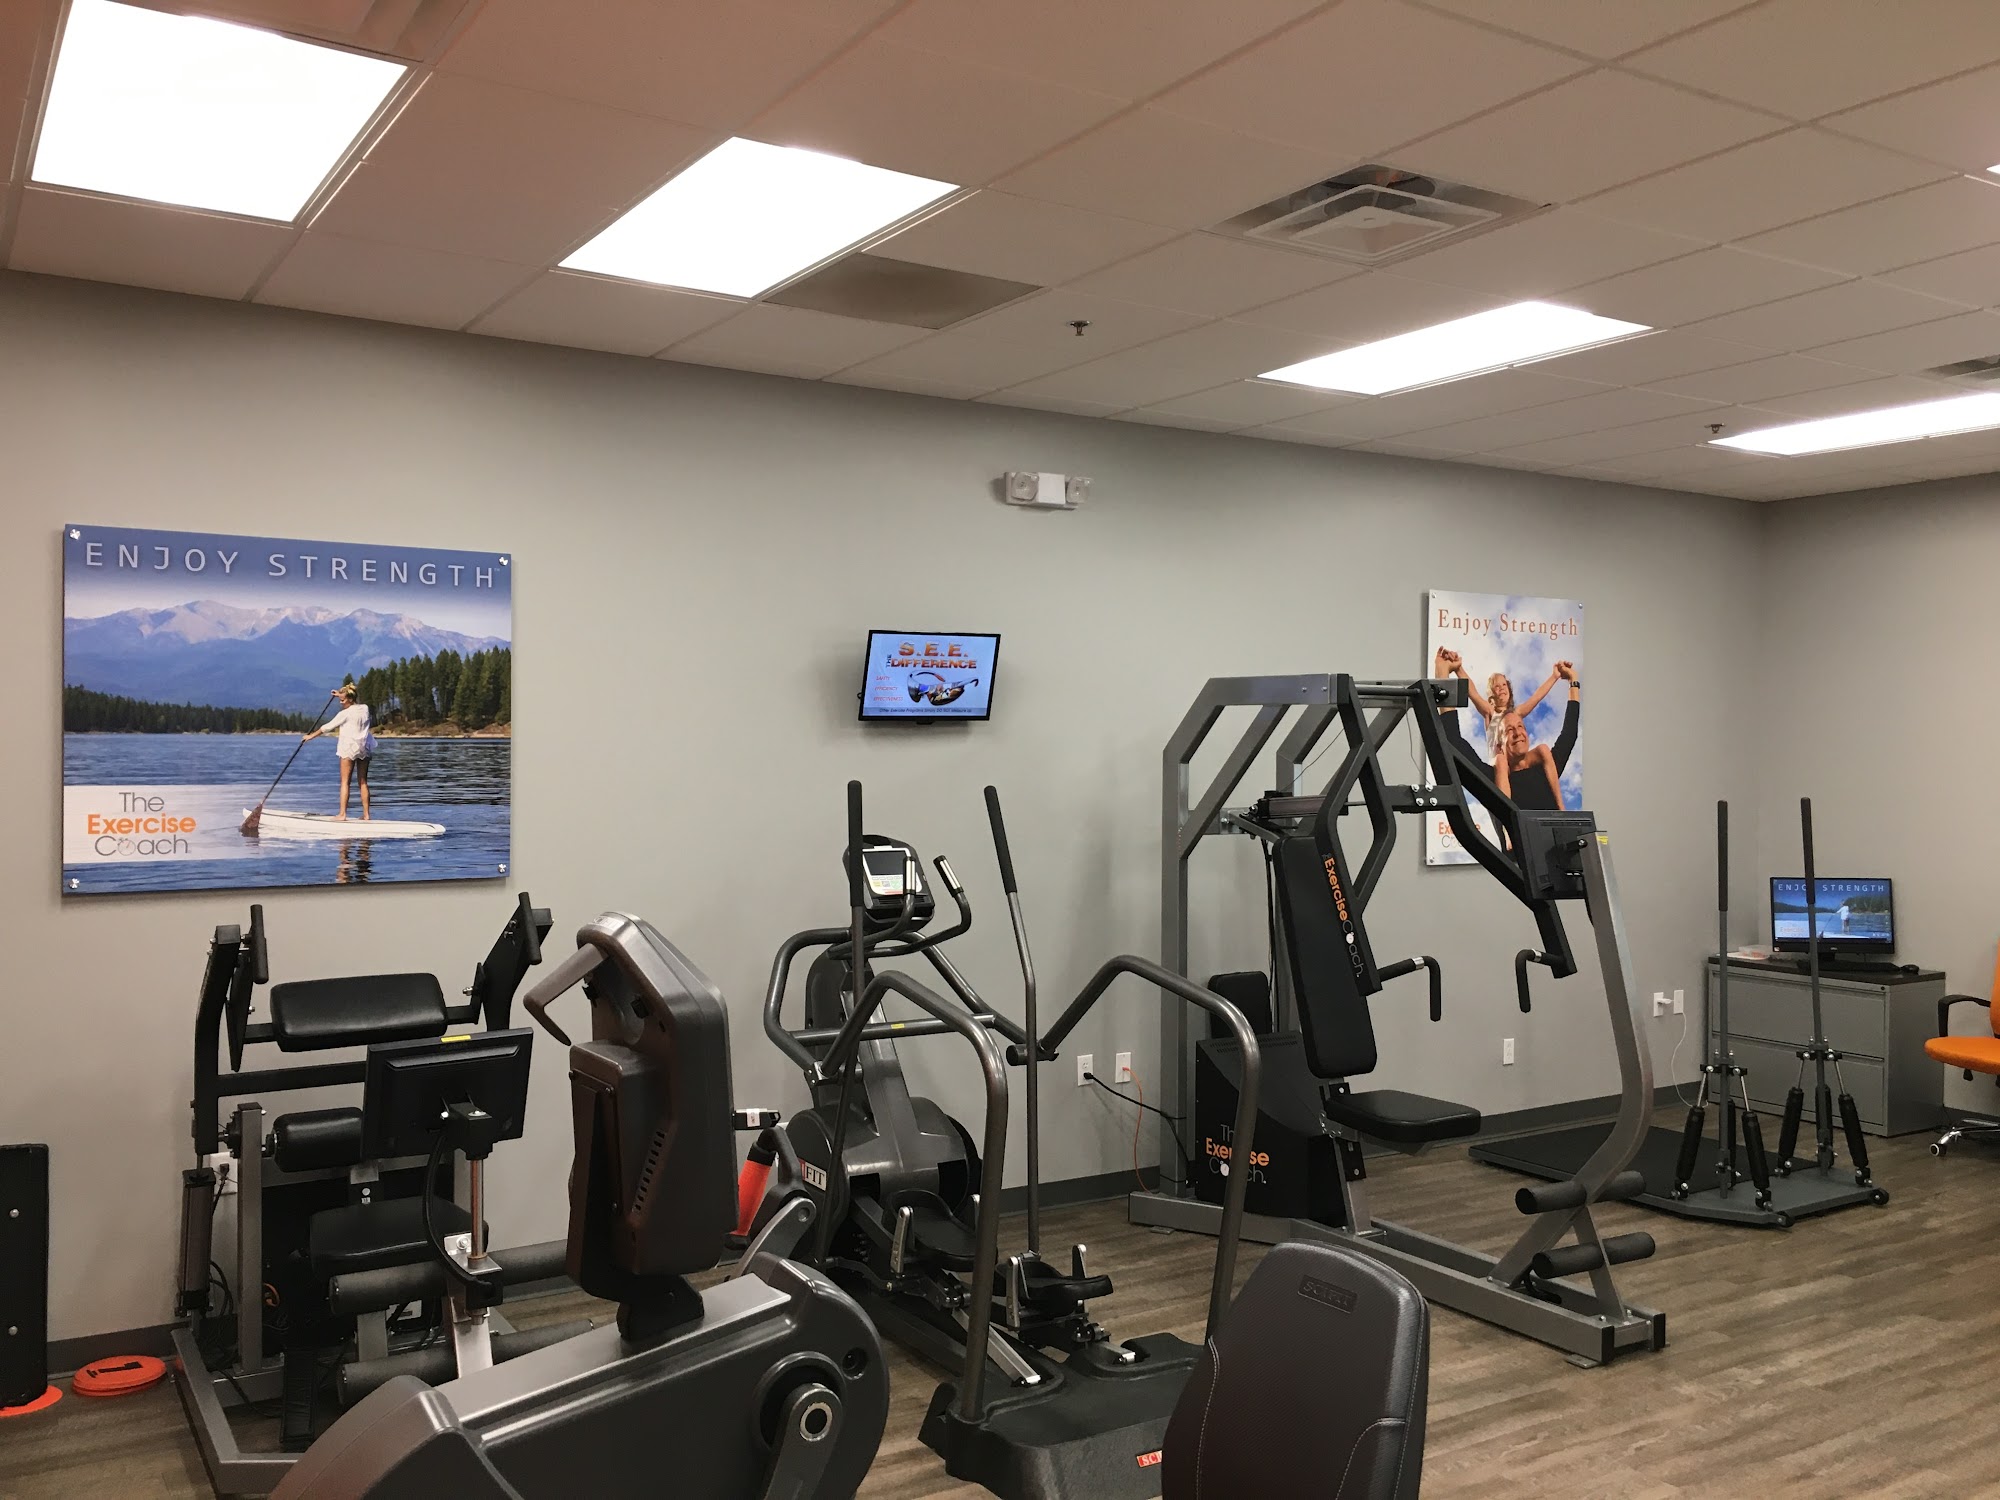 The Exercise Coach 186 Columbia Turnpike, Florham Park New Jersey 07932